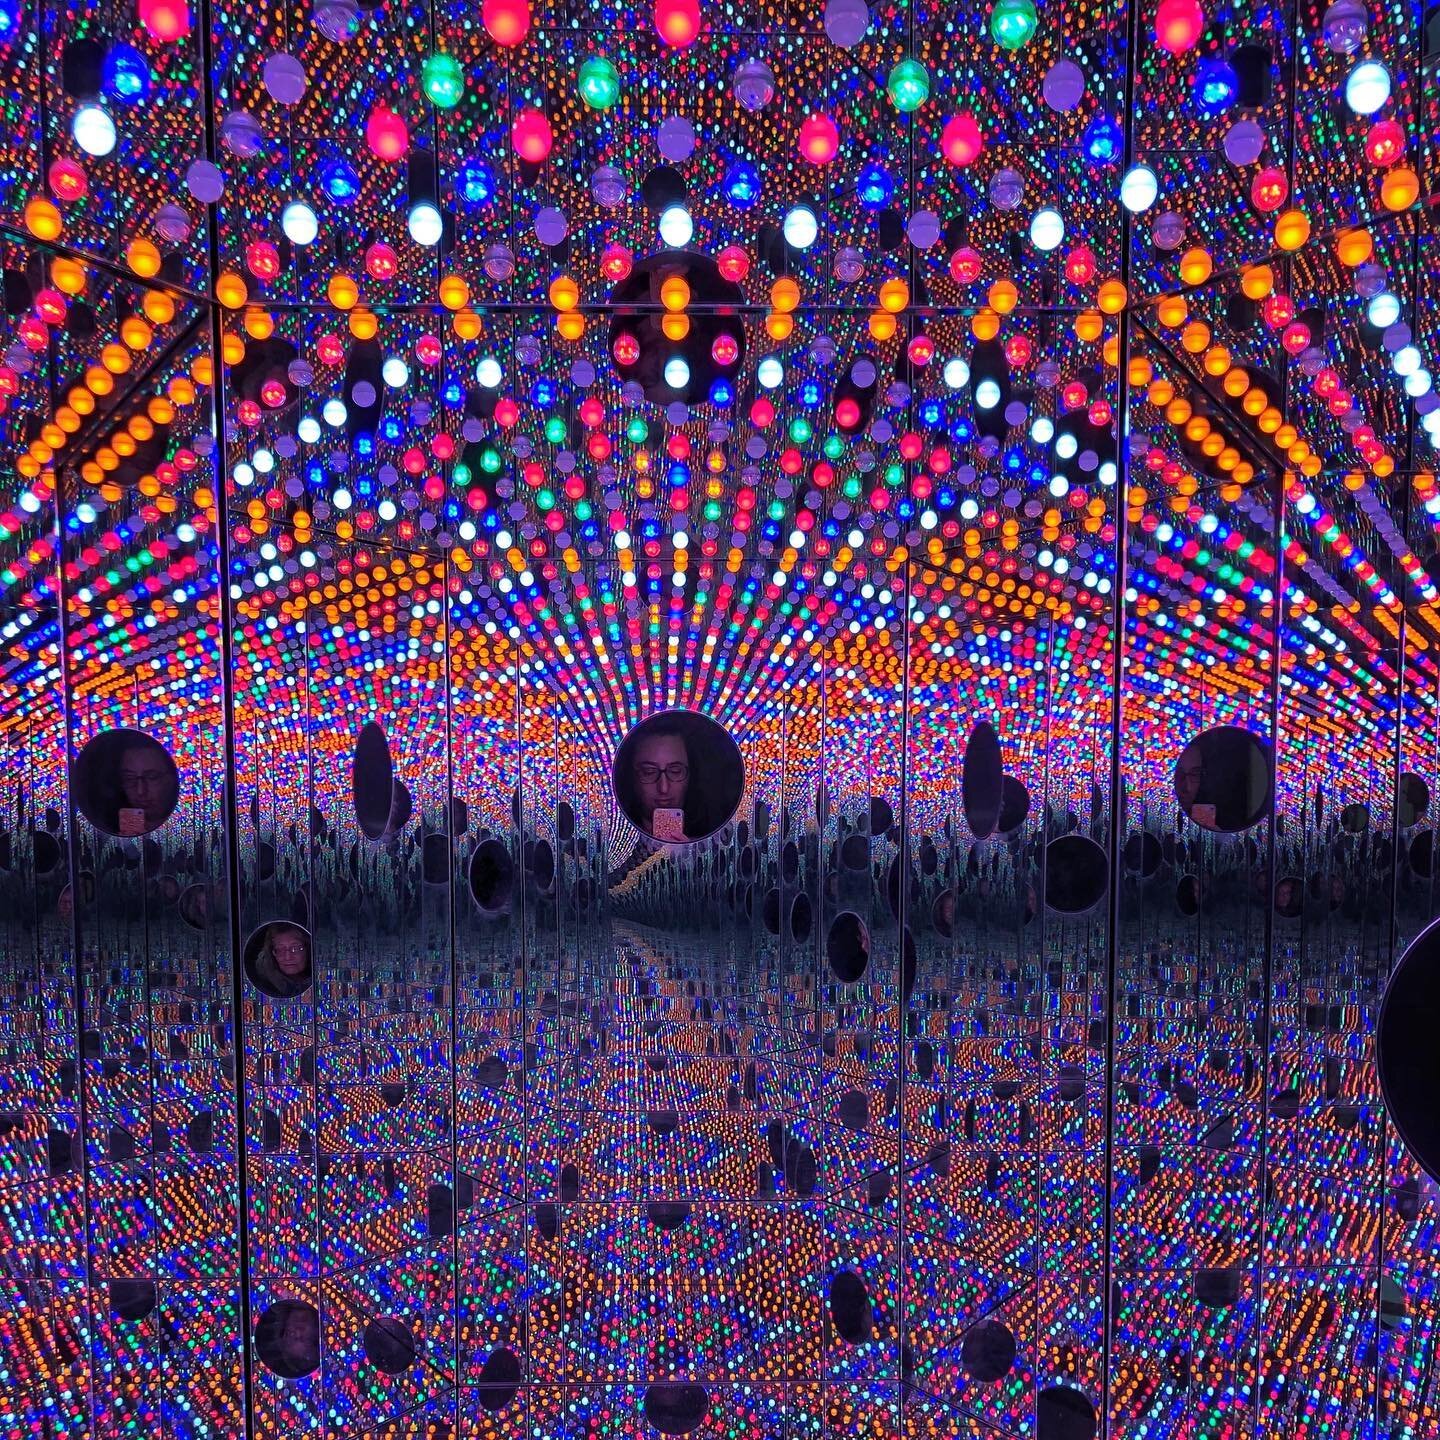 Pulled into Raleigh this morning and we&rsquo;ve been going full-tilt since 🏃&zwj;♀️ One standout: Yayoi Kusama&rsquo;s &ldquo;Light of Life&rdquo; at the @ncartmuseum, a mirrored infinity room that puts on an ultra-trippy light show 💥✨💥 To see it